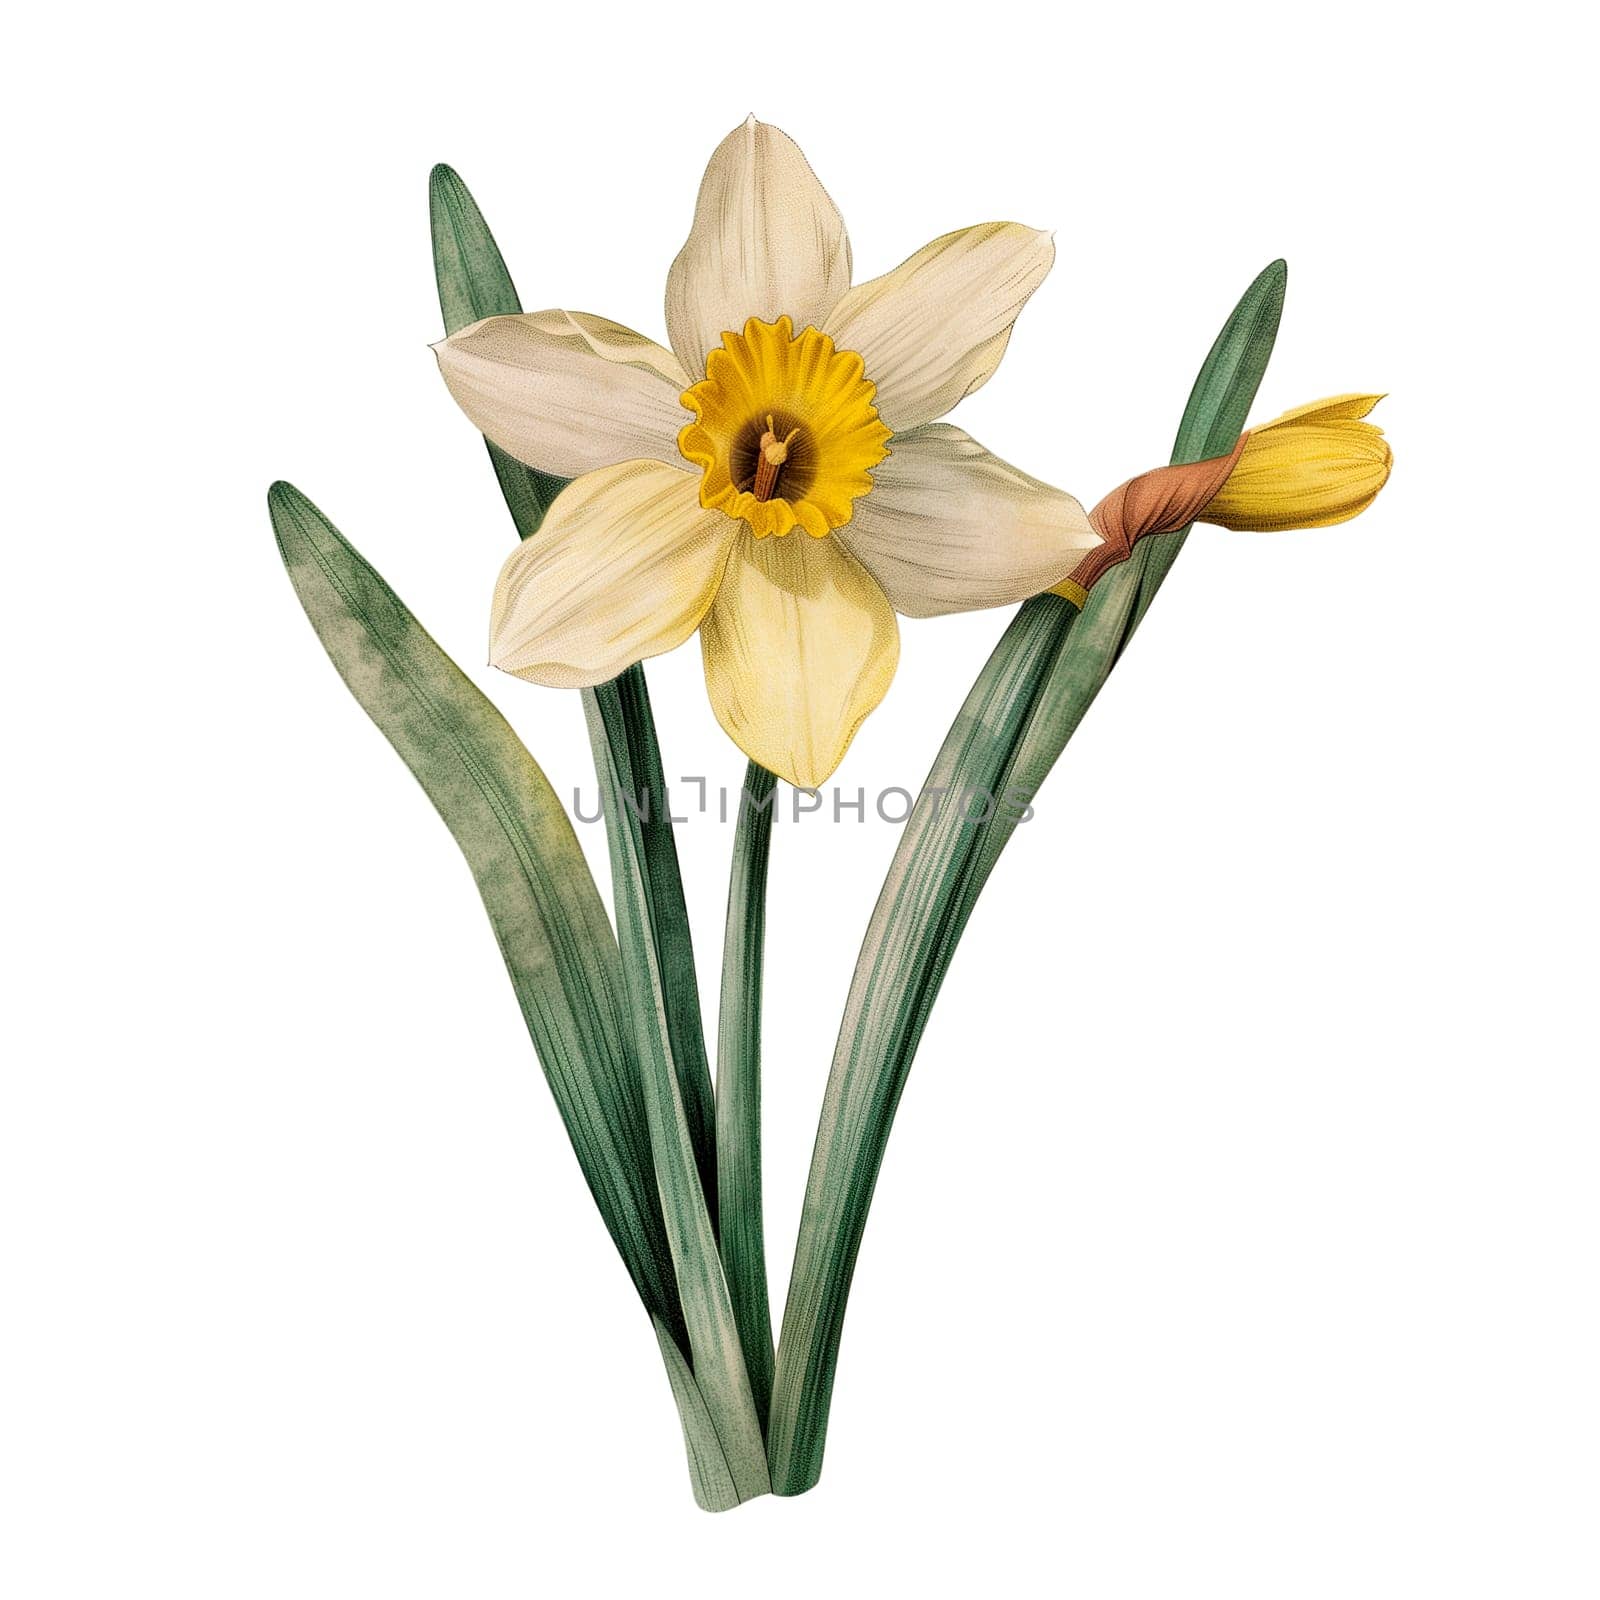 Isolated illustration of Daffodil by Dustick